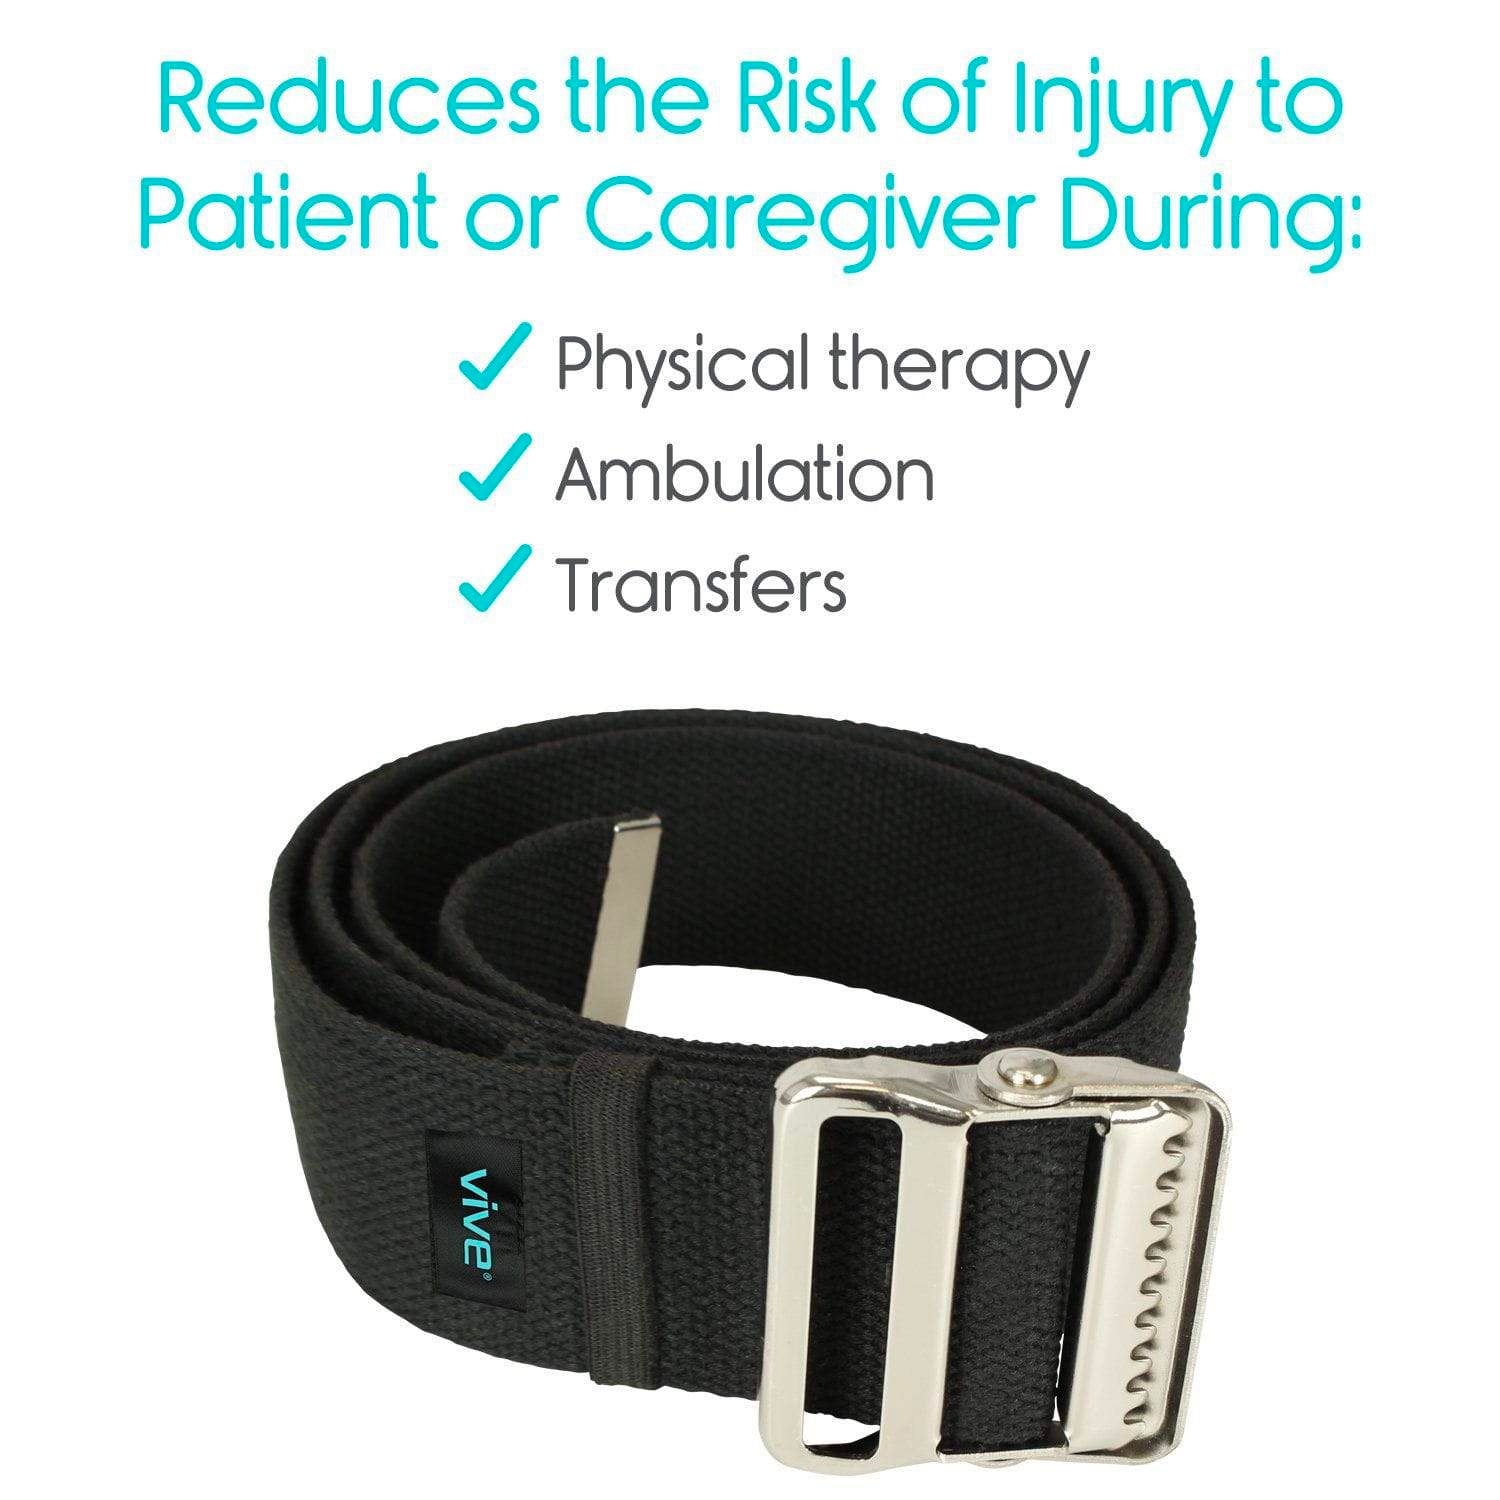 60" gait belt reduces the risk of injury to patient or caregiver during transfers